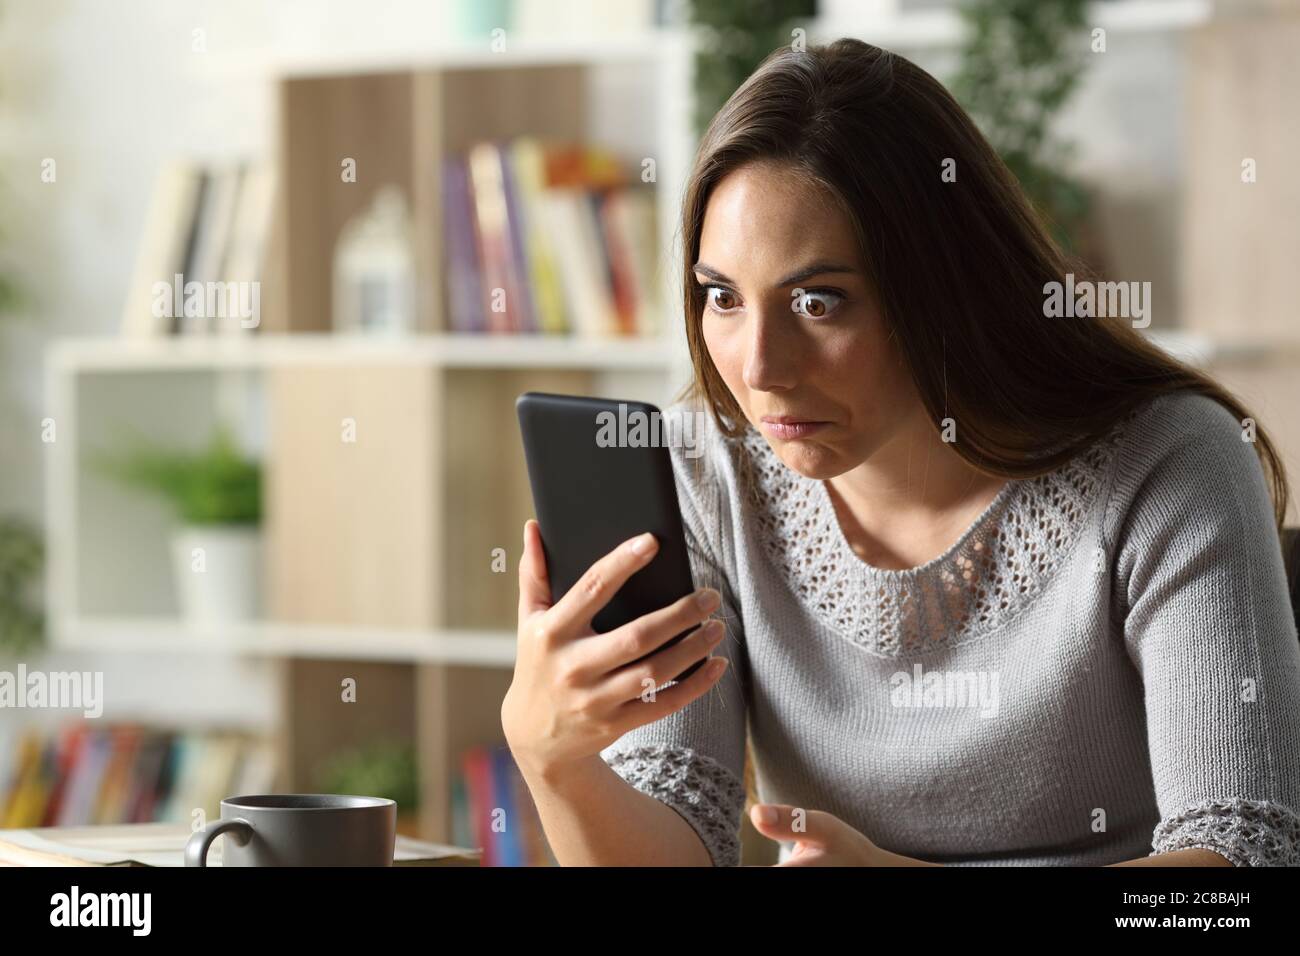 Perplexed woman looking surprised at smart phone sitting on a desk at home Stock Photo